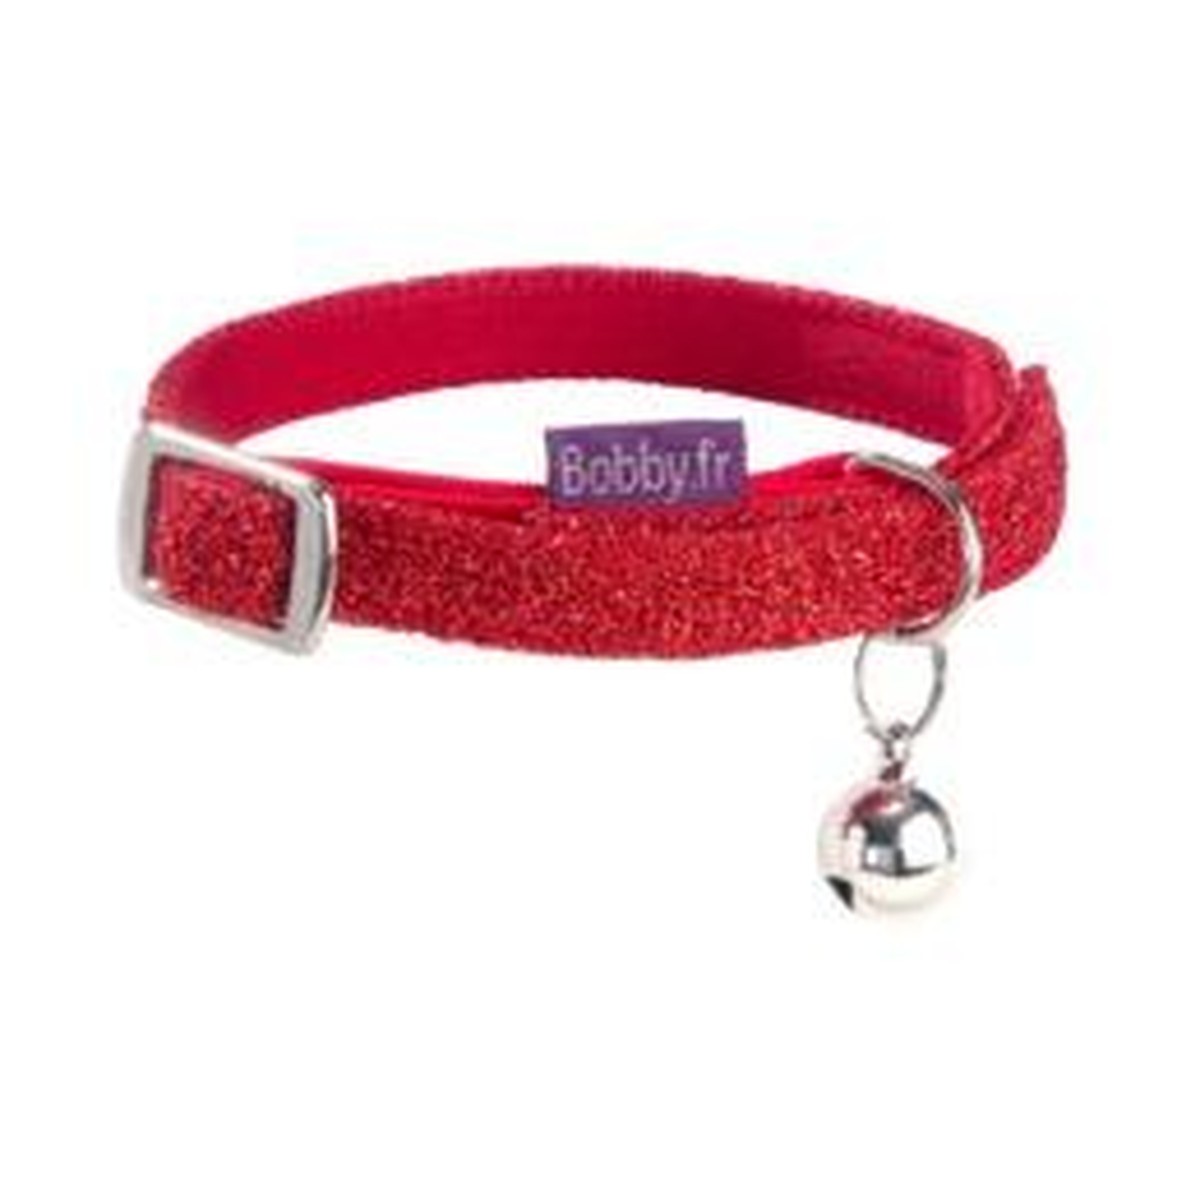 Bobby disco COLLIER CHAT DISCO TXS Rouge magenta ou rouge primaire XS